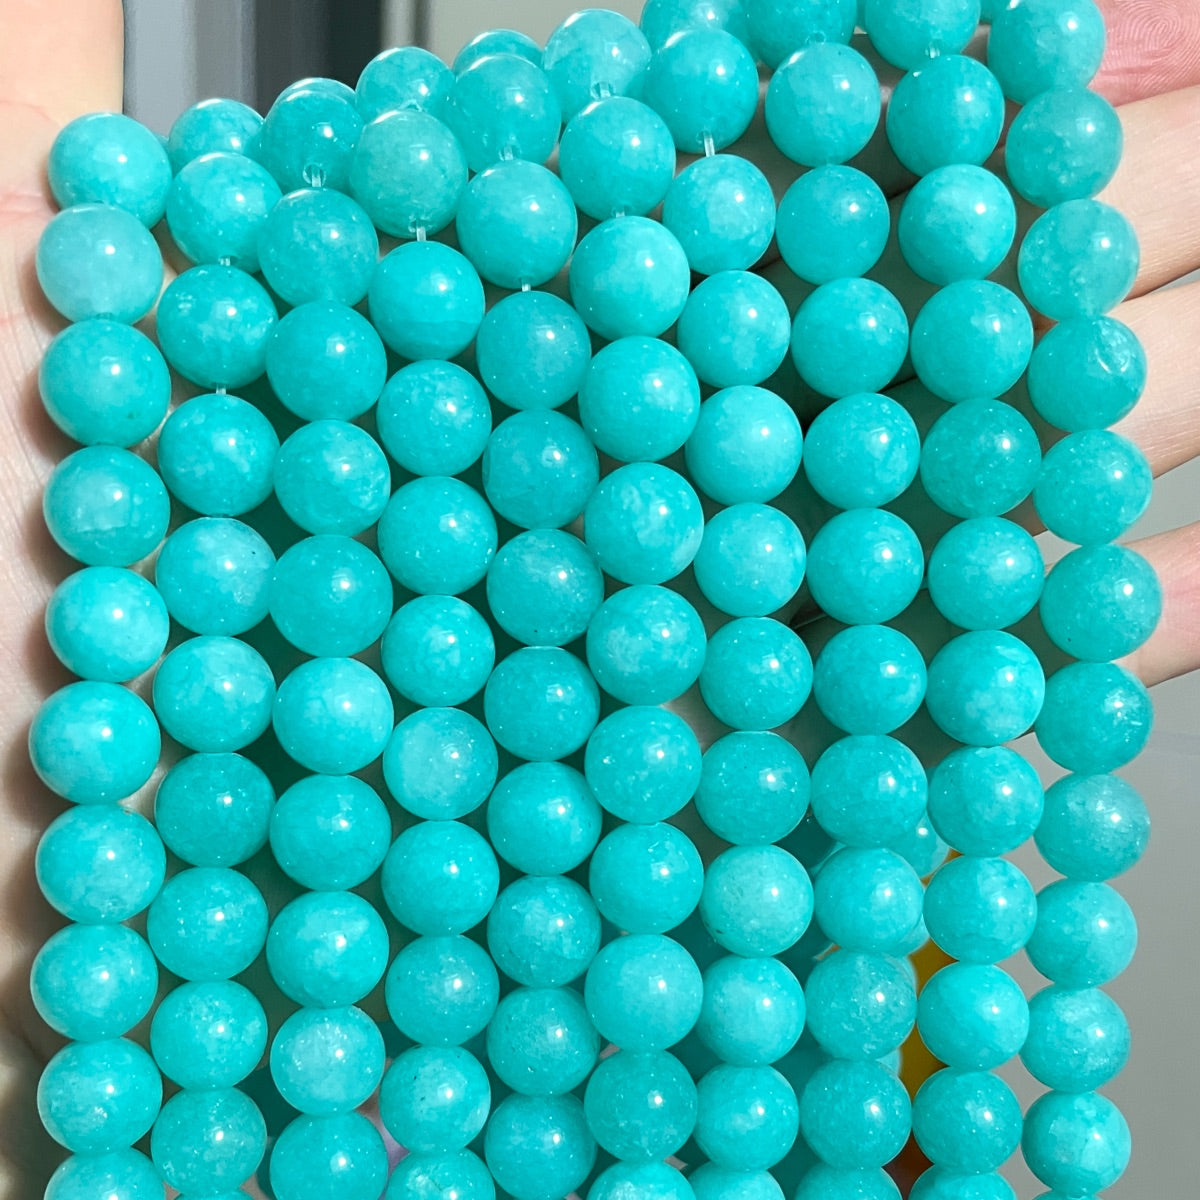 2 Strands/lot 10mm Turquoise Blue Chalcedony Jade Round Stone Beads Stone Beads New Beads Arrivals Round Jade Beads Charms Beads Beyond